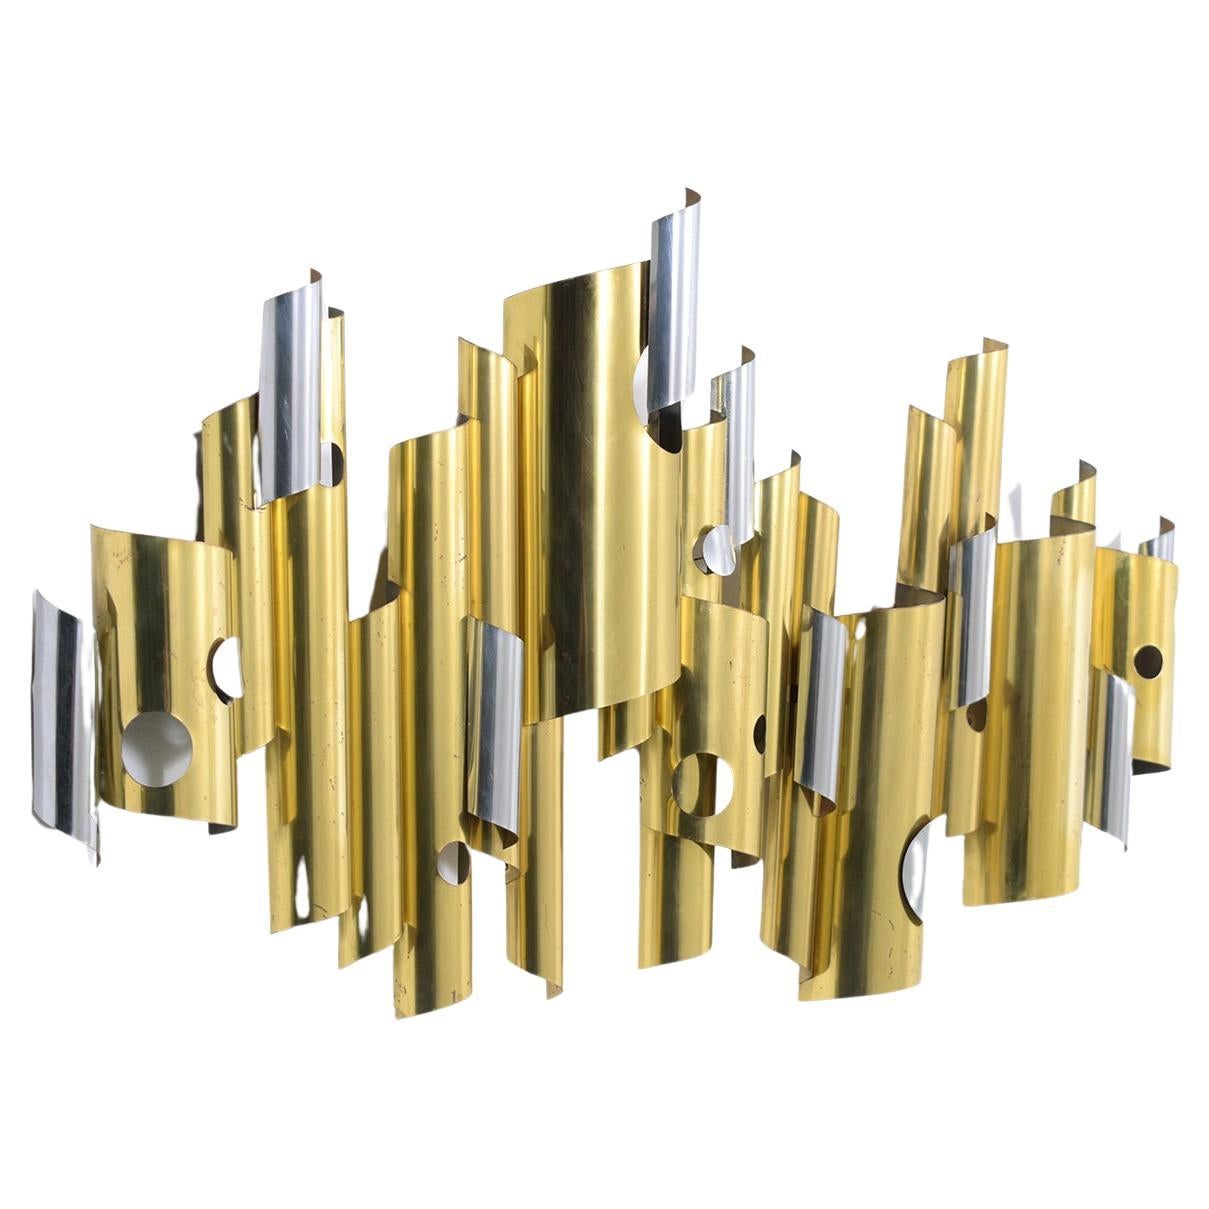 This extraordinary 1960s mid-century modern contemporary wall sculpture is by C. Jere. is in great condition executed out of brass and steel and finished in chrome, newly cleaned and polished developing a beautiful vintage luster patina finished